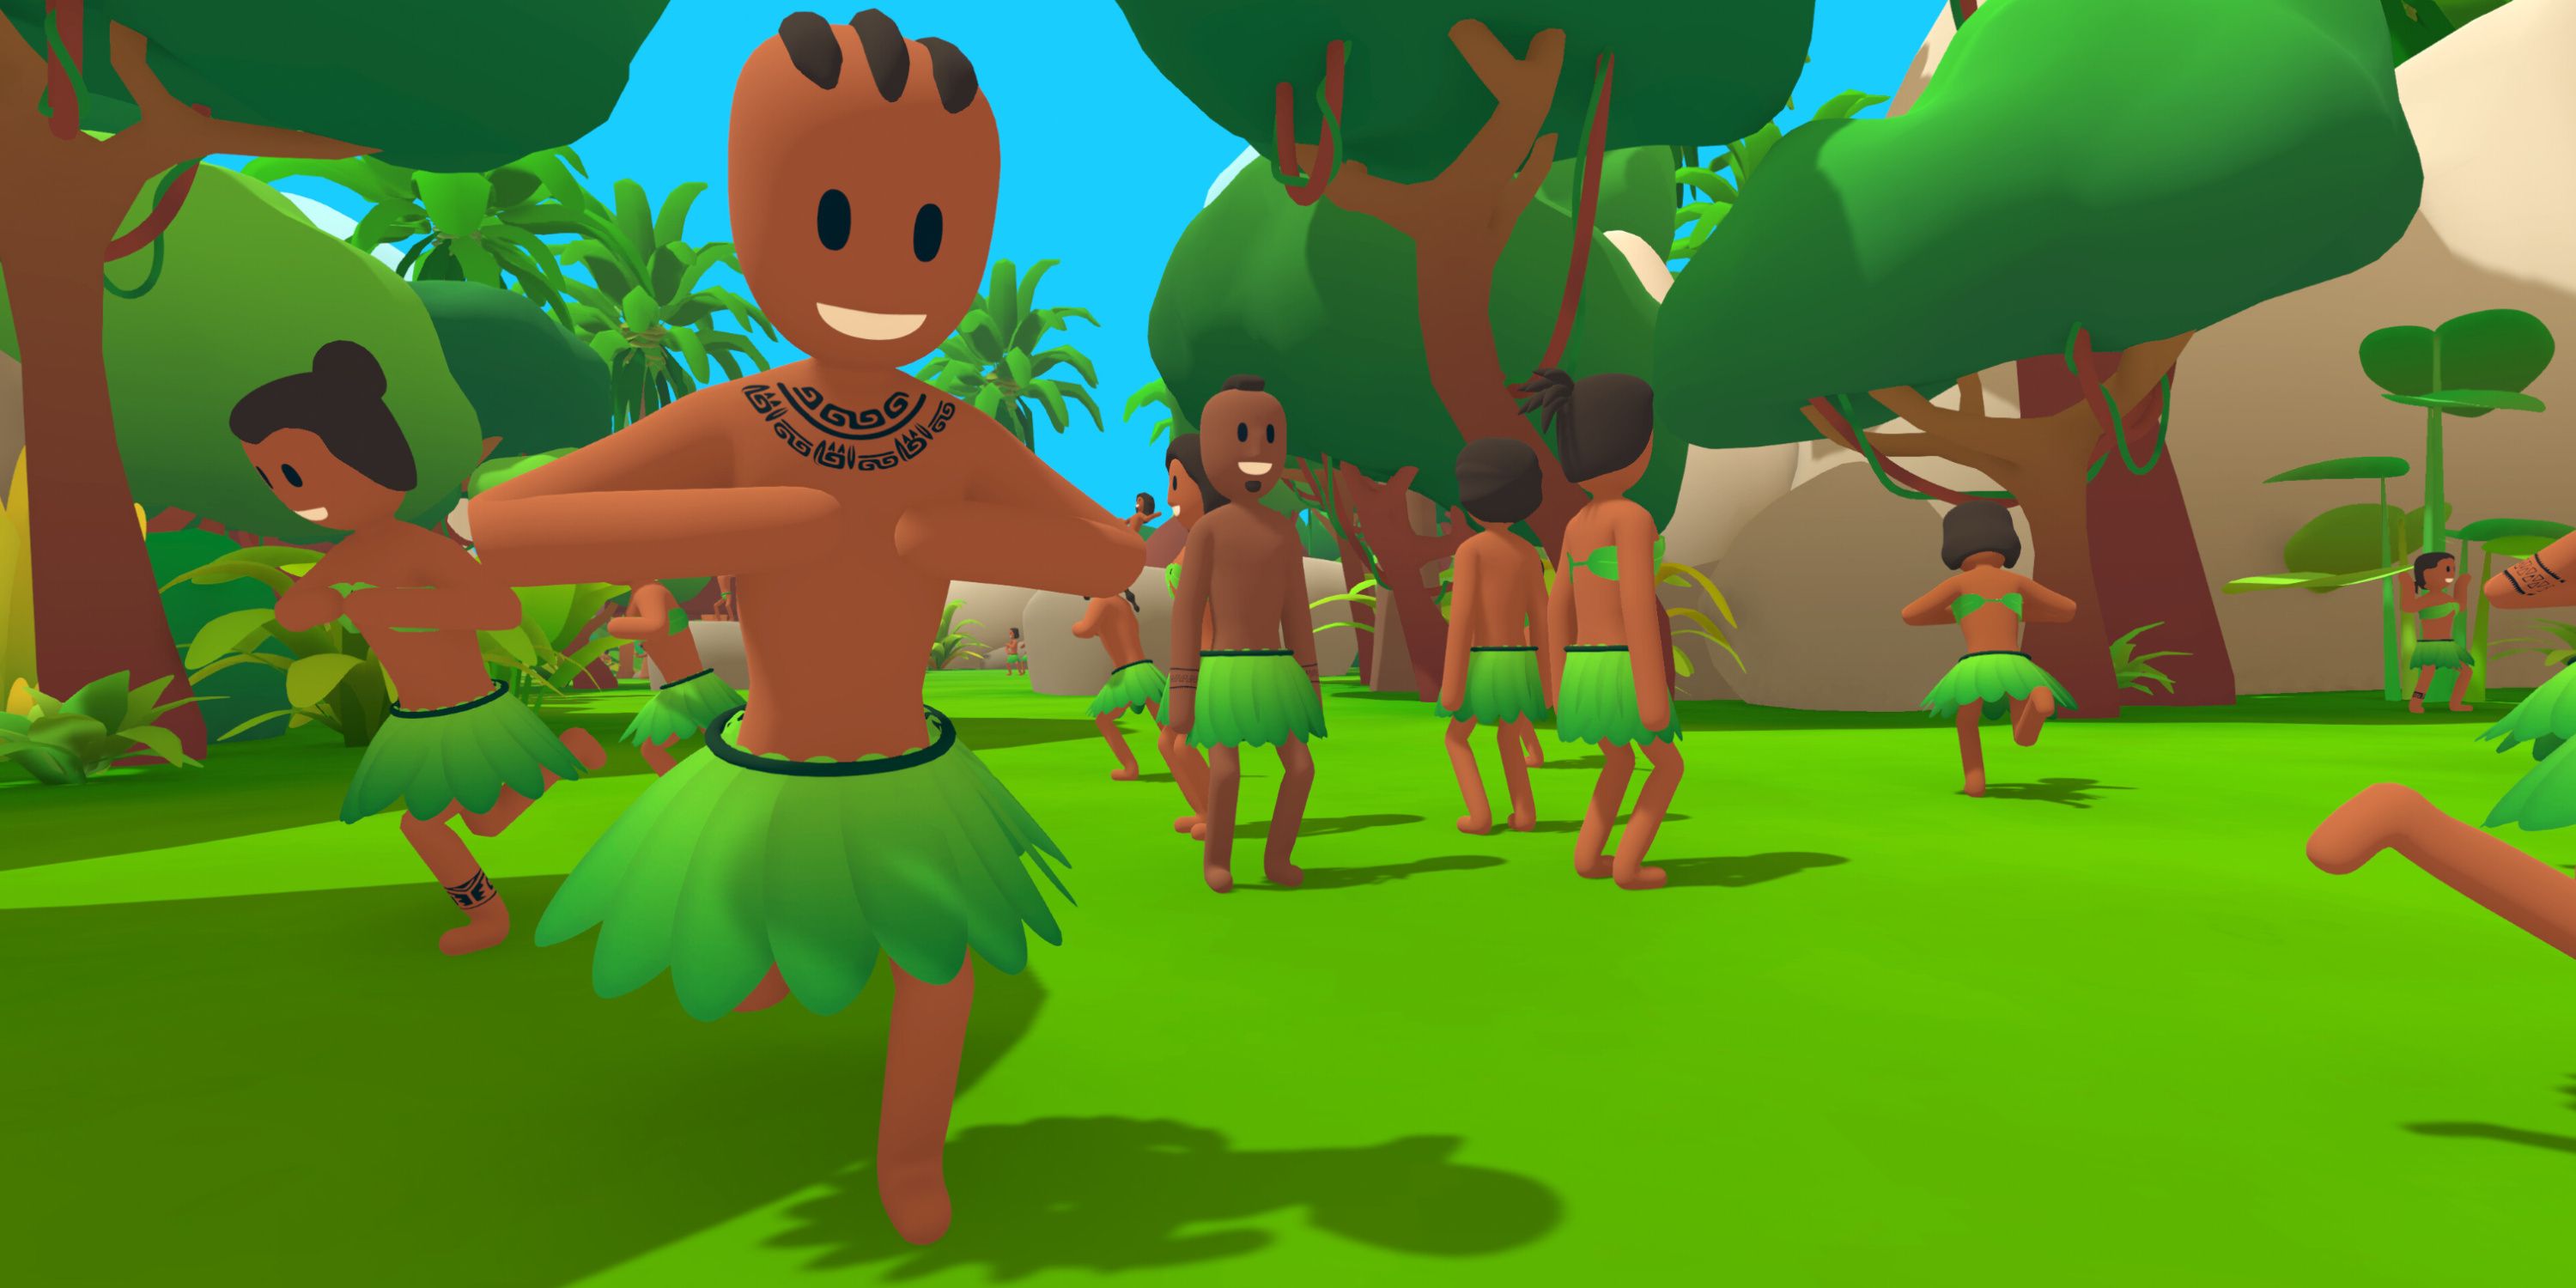 The people of the island dance happily minutes before disaster strikes